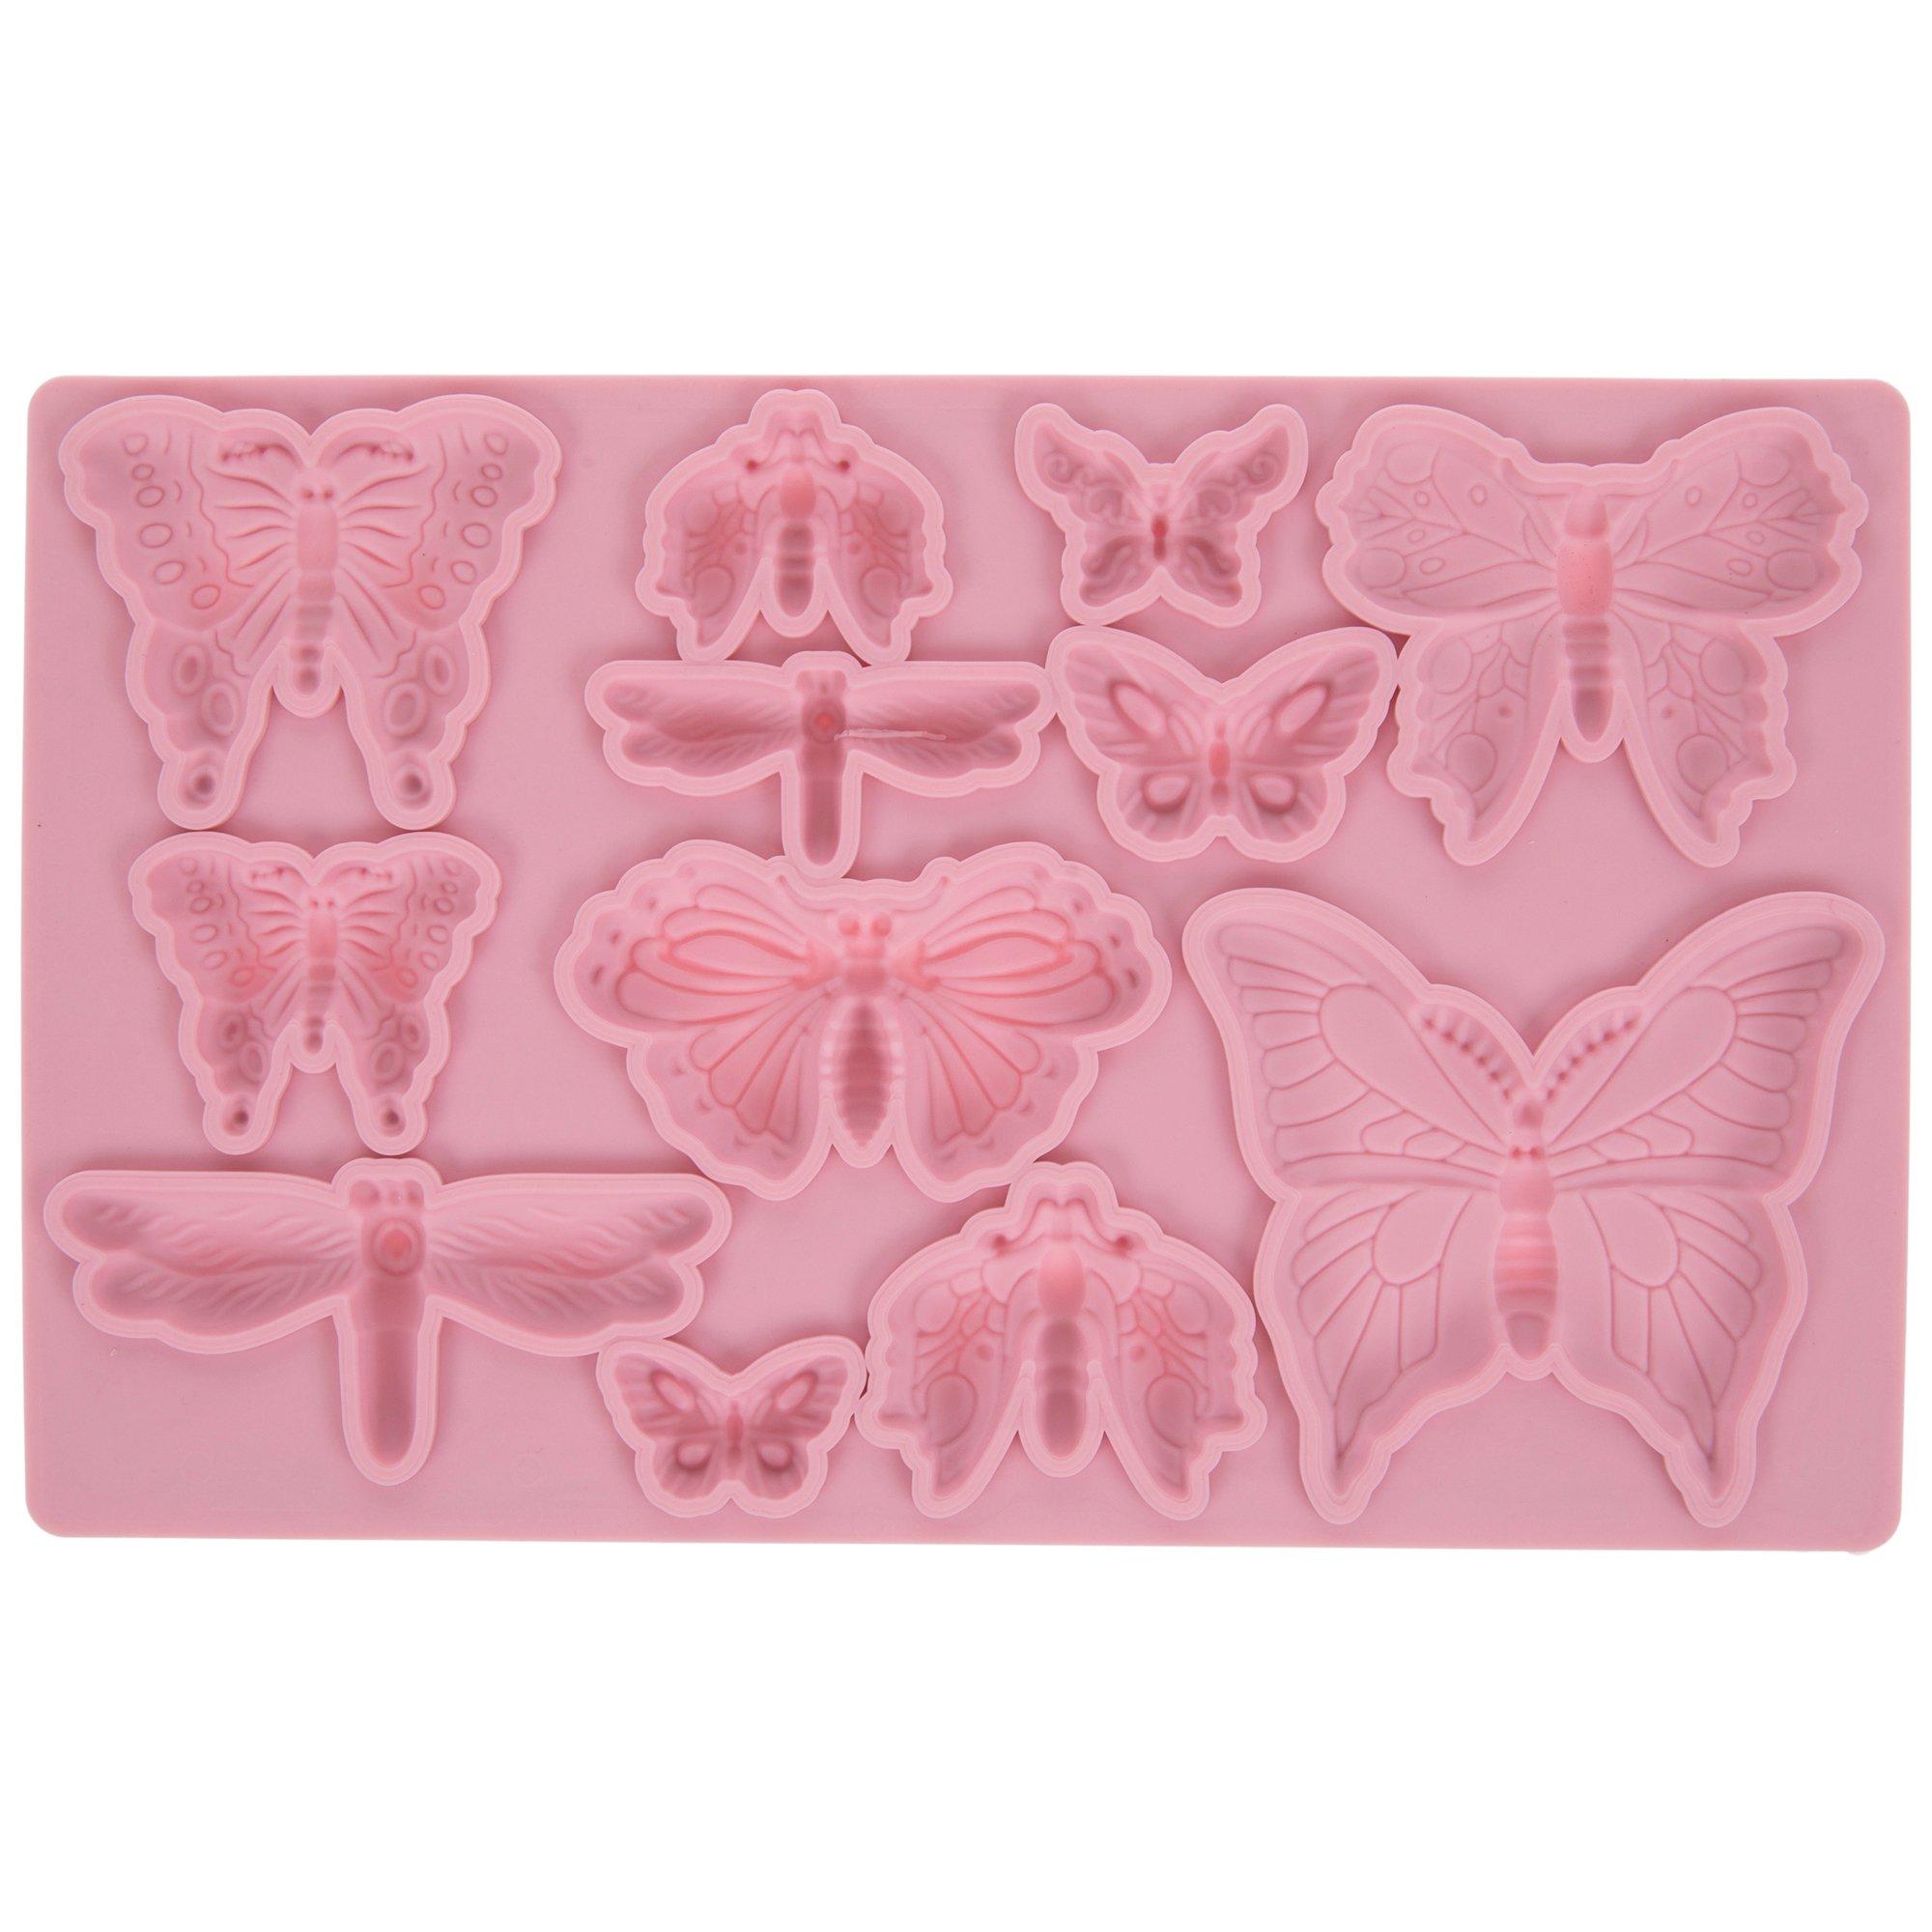 Stouge 4 Pcs Butterfly Mold Silicone Candy Molds for Chocolate